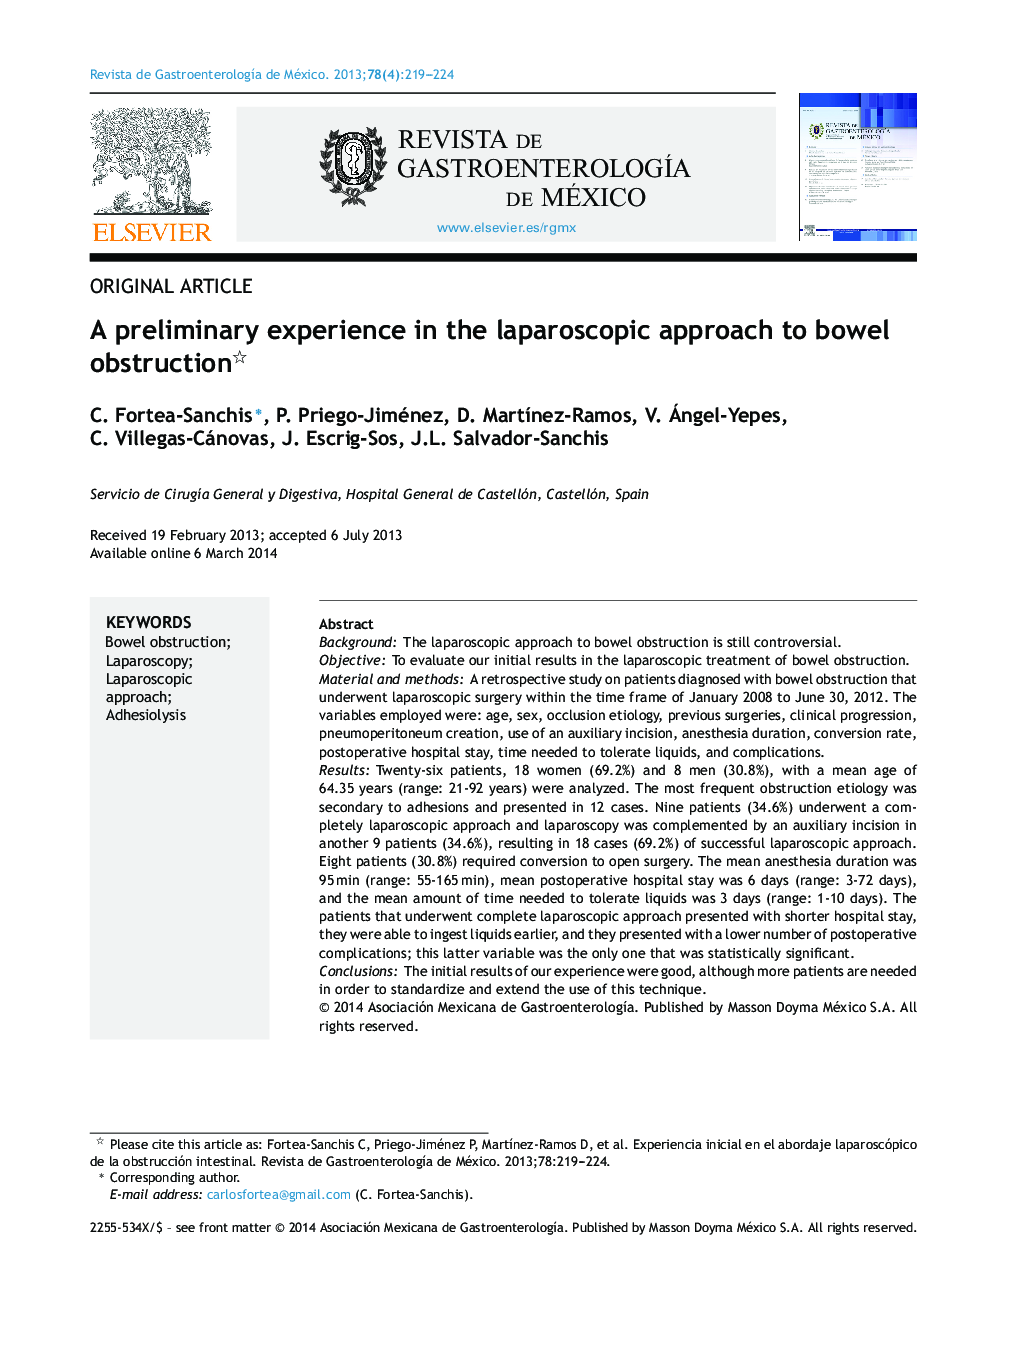 A preliminary experience in the laparoscopic approach to bowel obstruction 